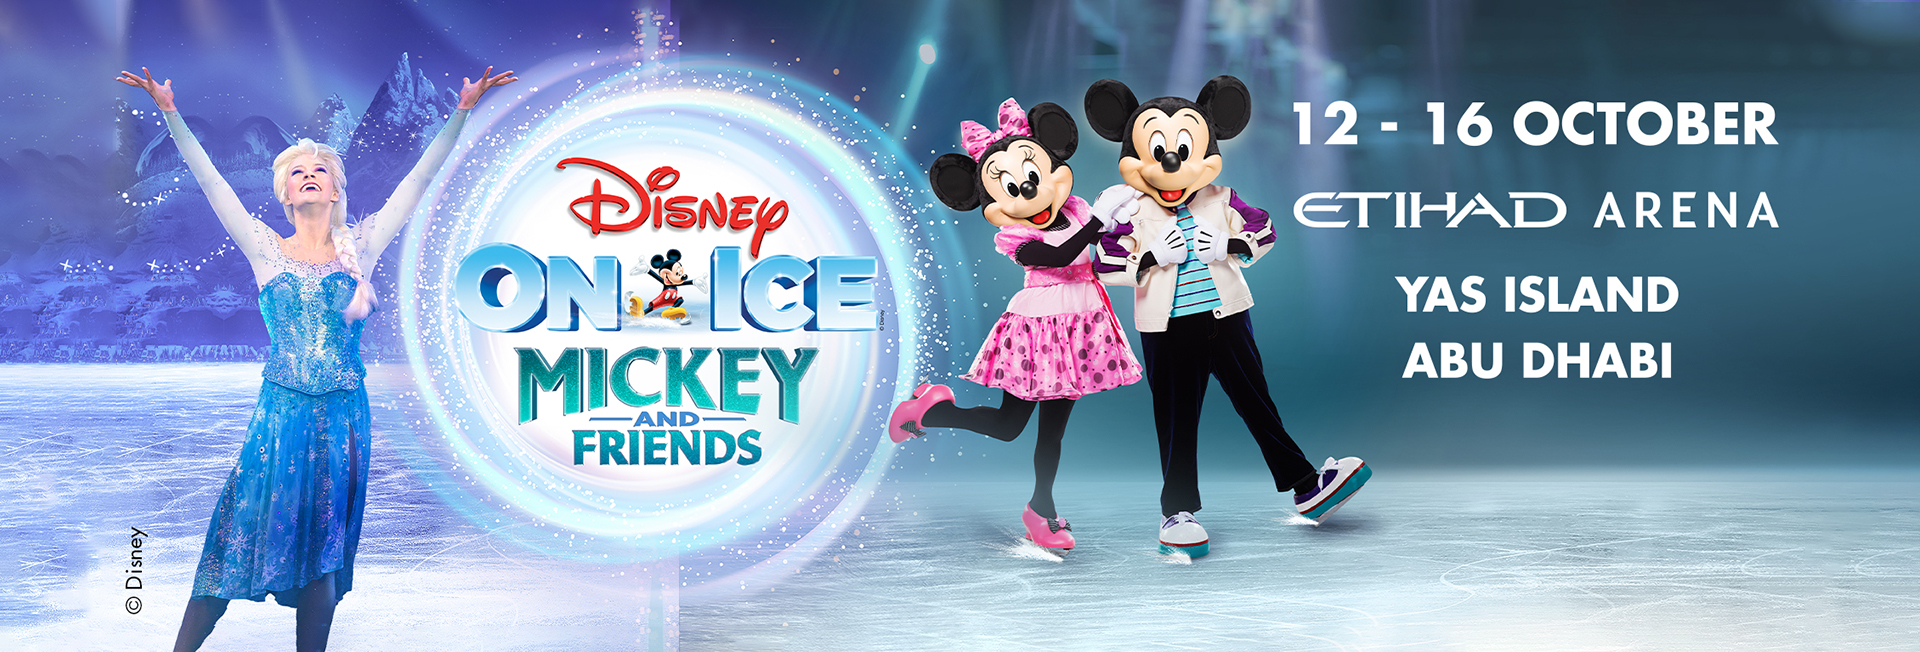 Disney on Ice presents Mickey and Friends - Etihad Arena, Yas Bay Waterfront